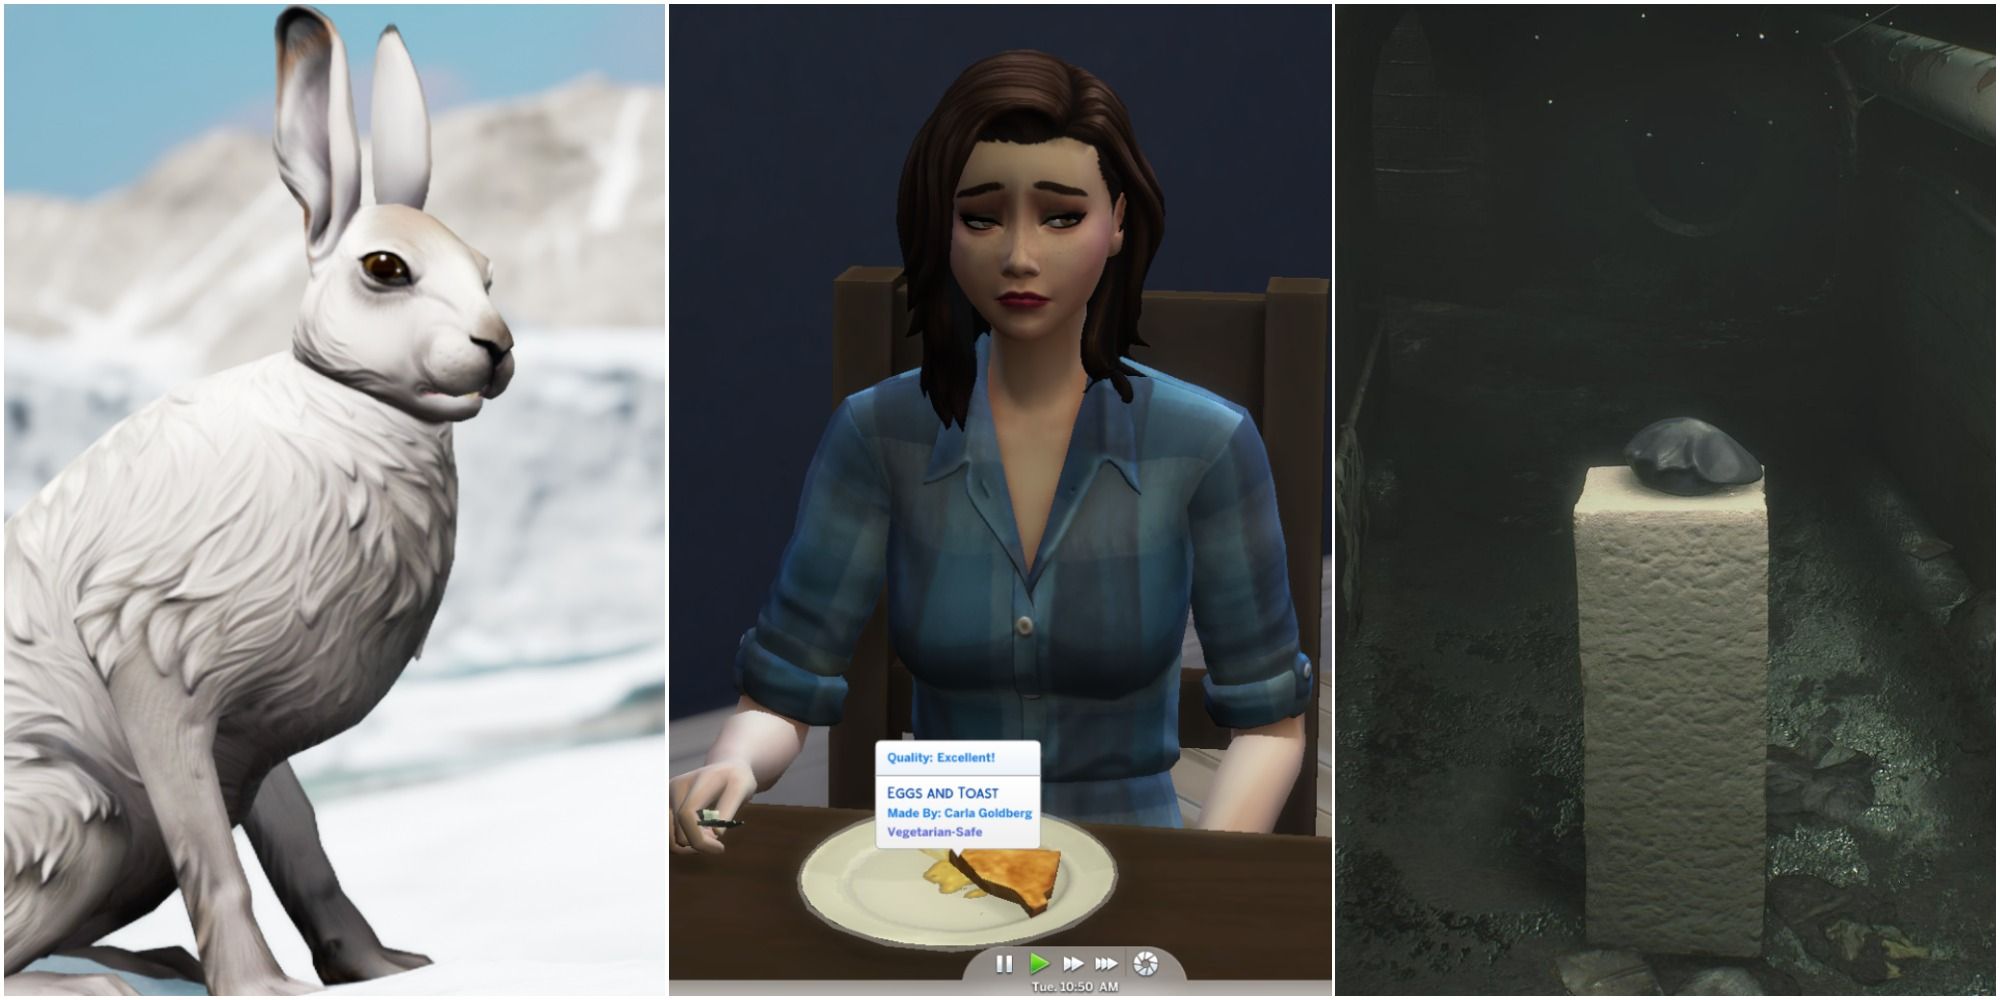 Dread Hunger showing rabbit The Sims 3 eating eggs & toast Resident Evil 2 Tofu playing as a Vegetarian